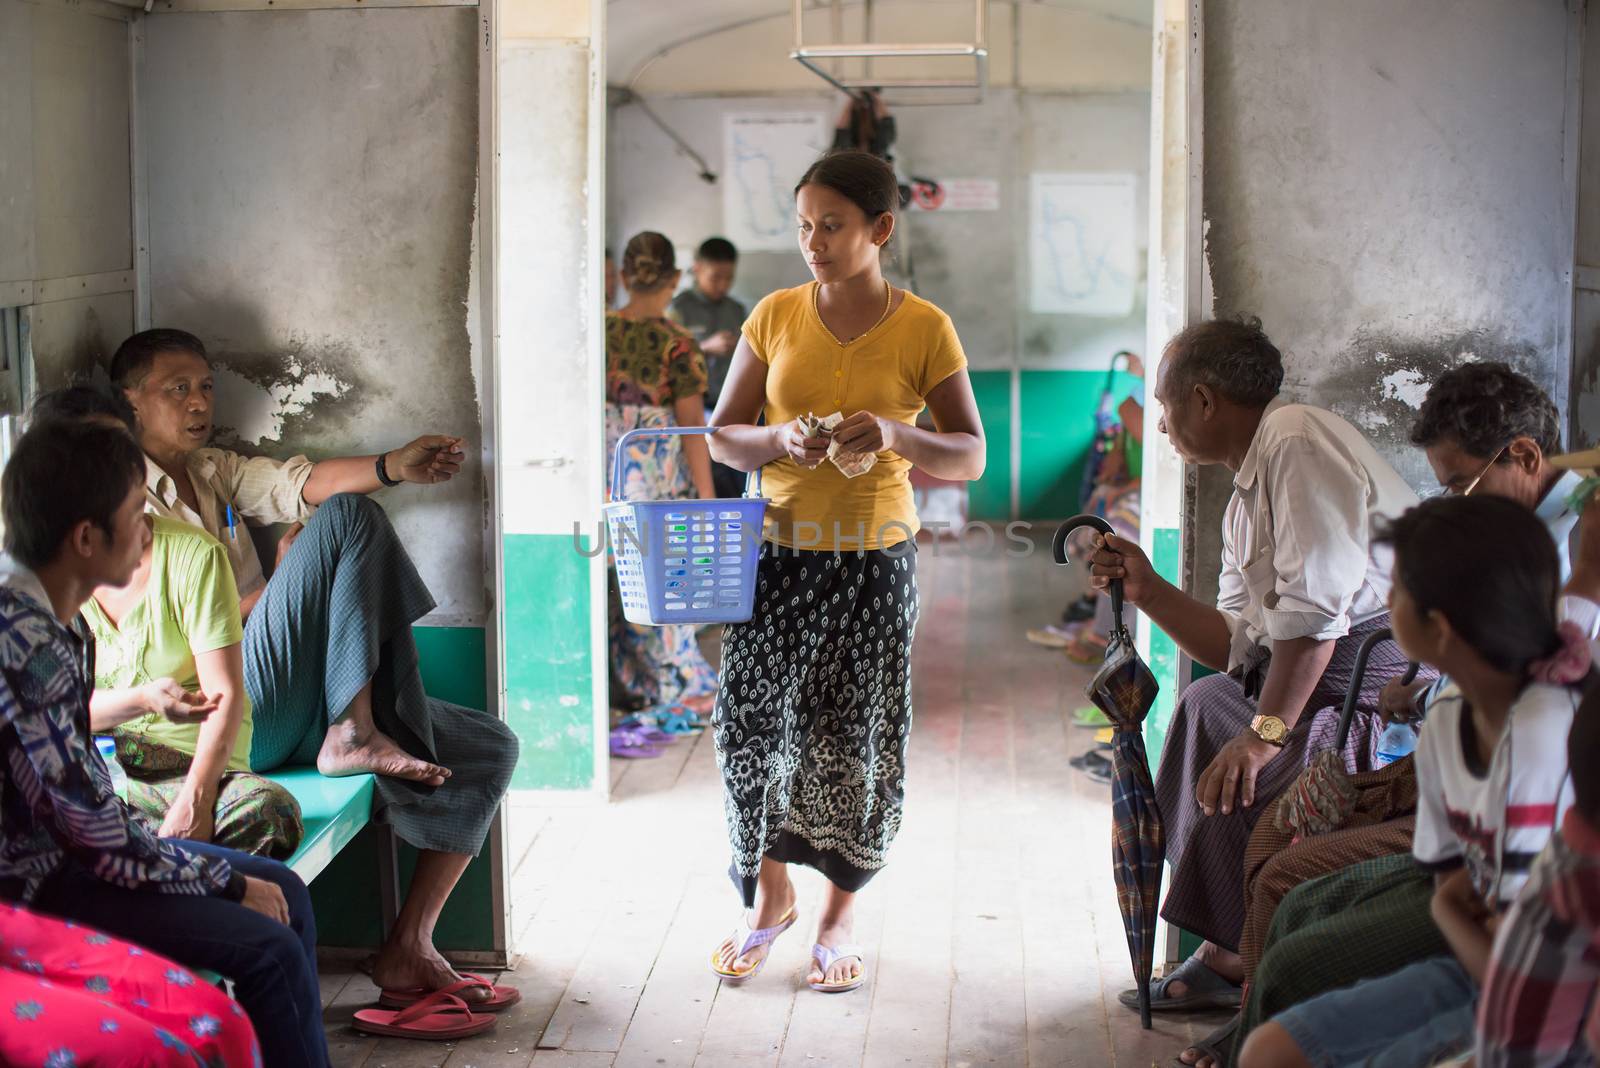 Yangon, Myanmar - July 5, 2015: Woman selling food and drinks onboard a commuter train at the outskirts of Yangon.